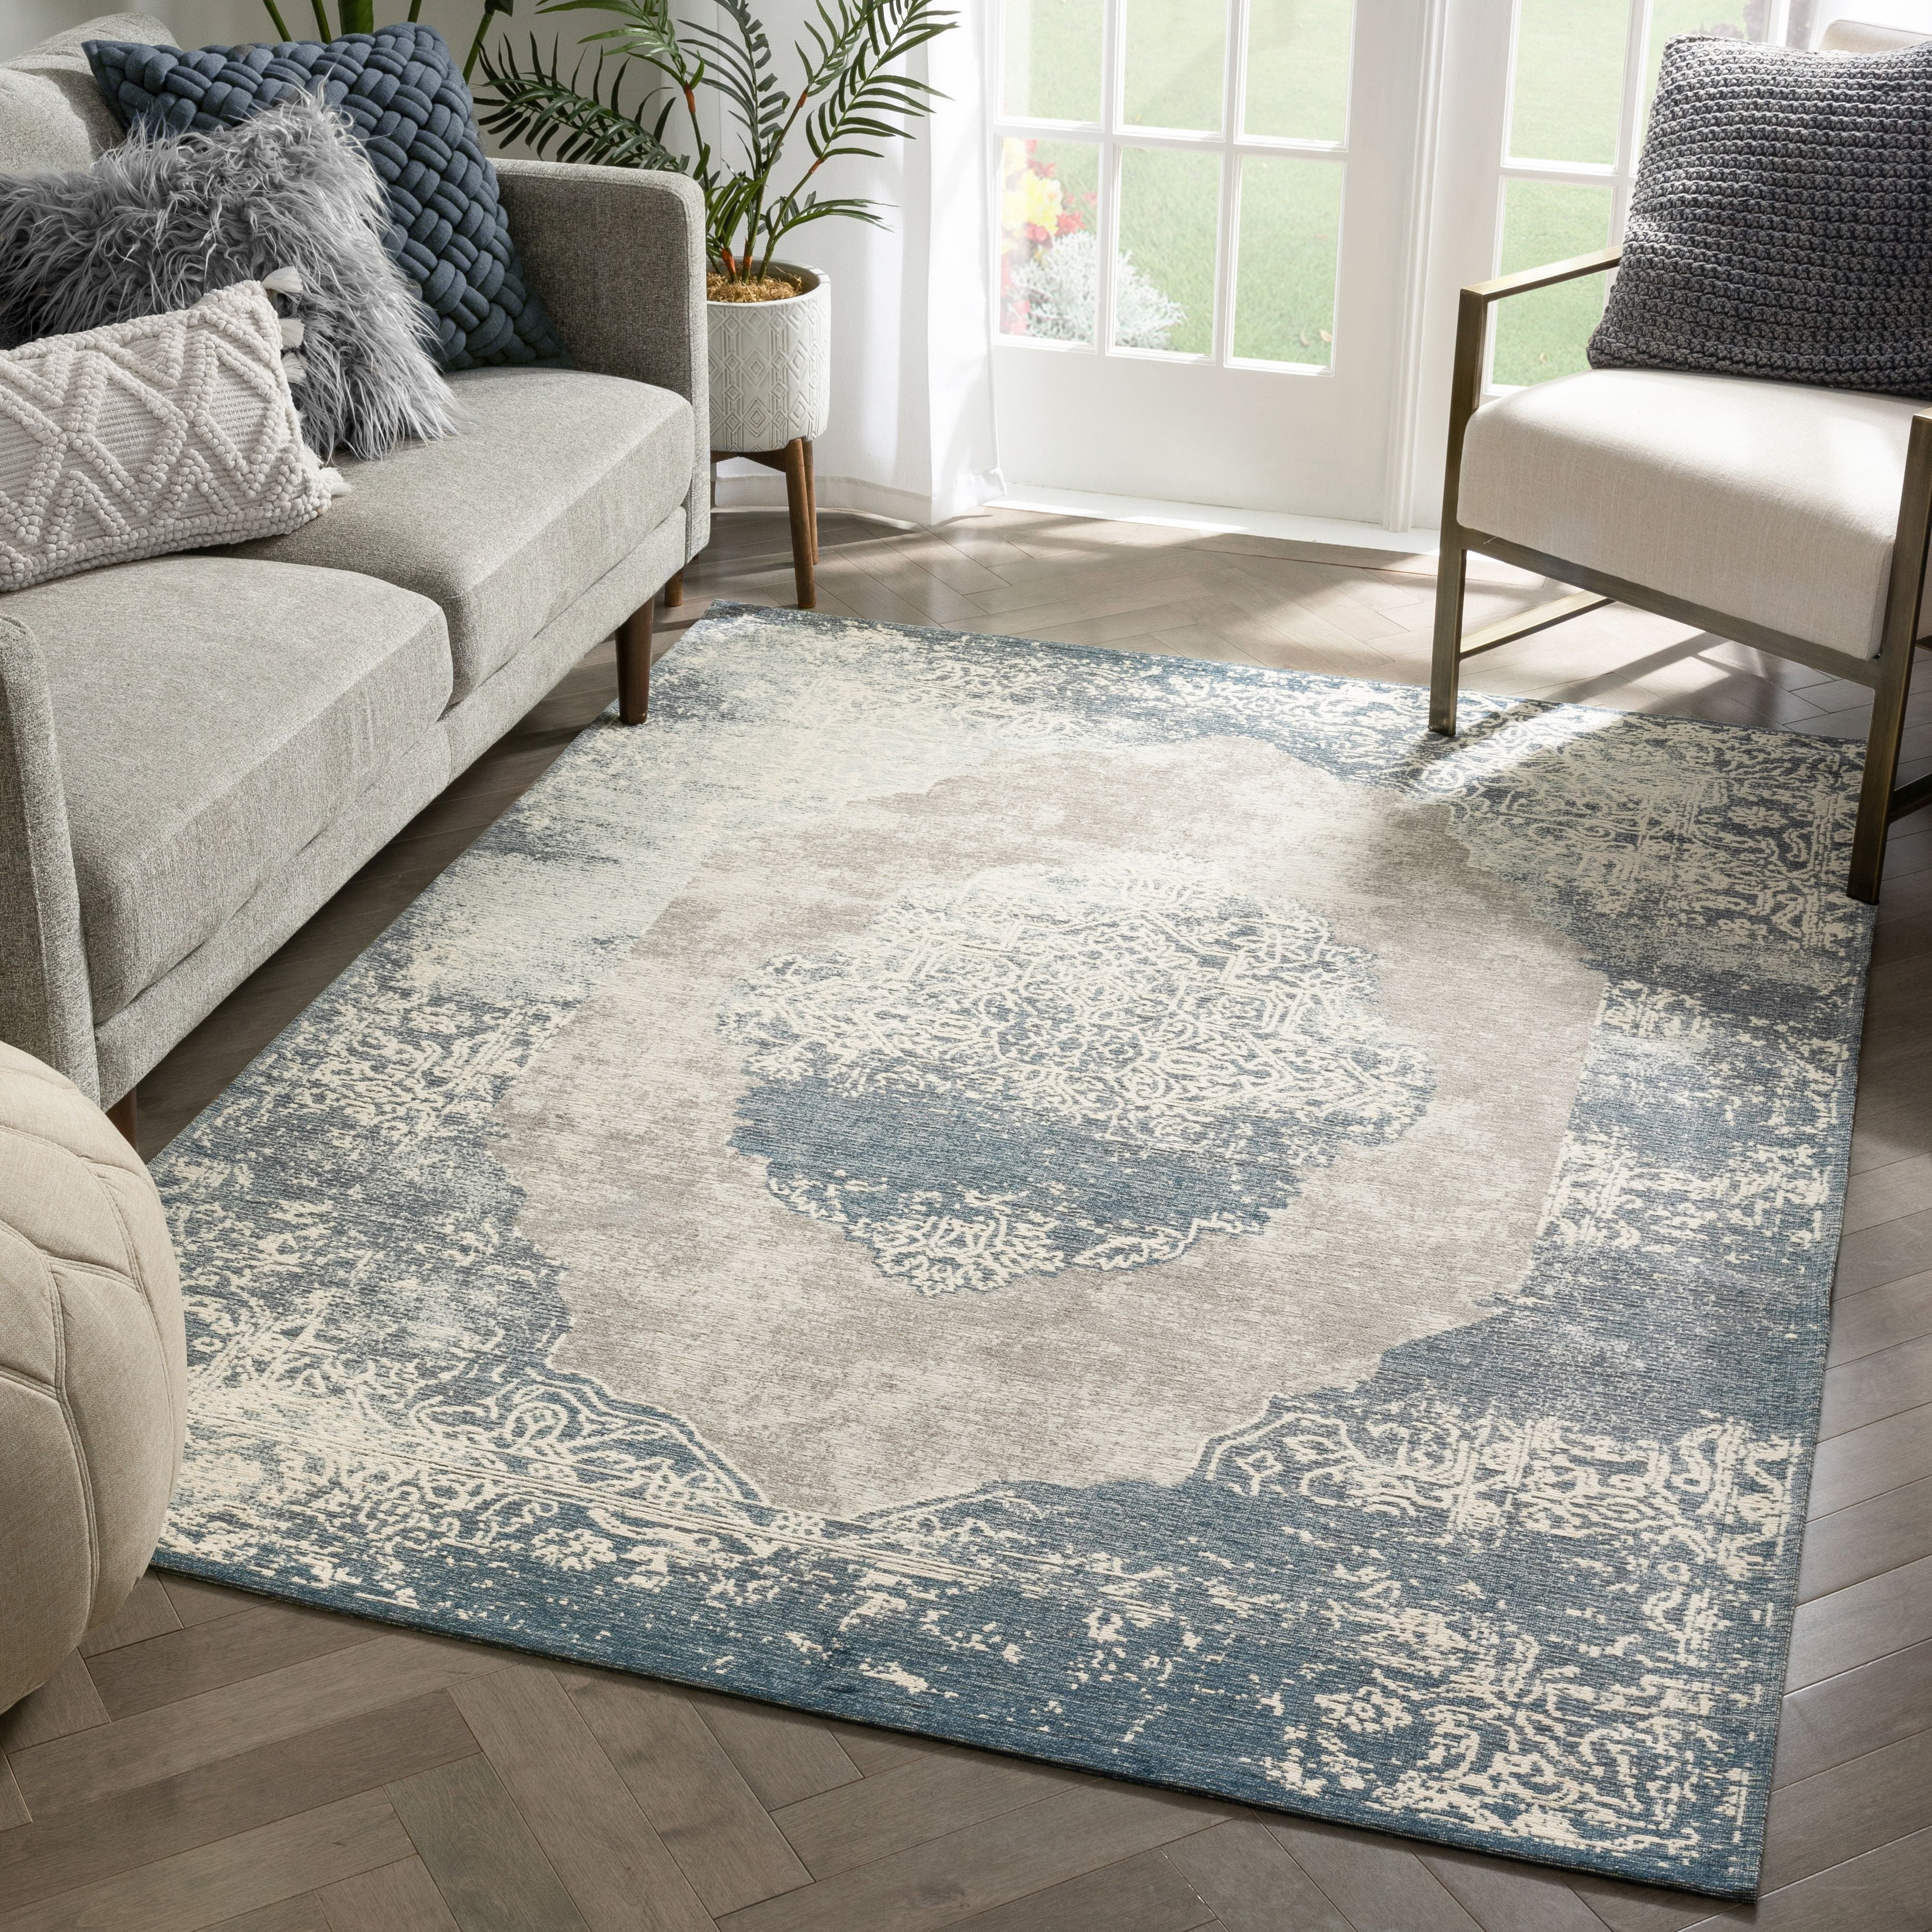 Well Woven Altro Blue & Beige Abstract Distressed Area Rug 5x7 5'3 x 7'3